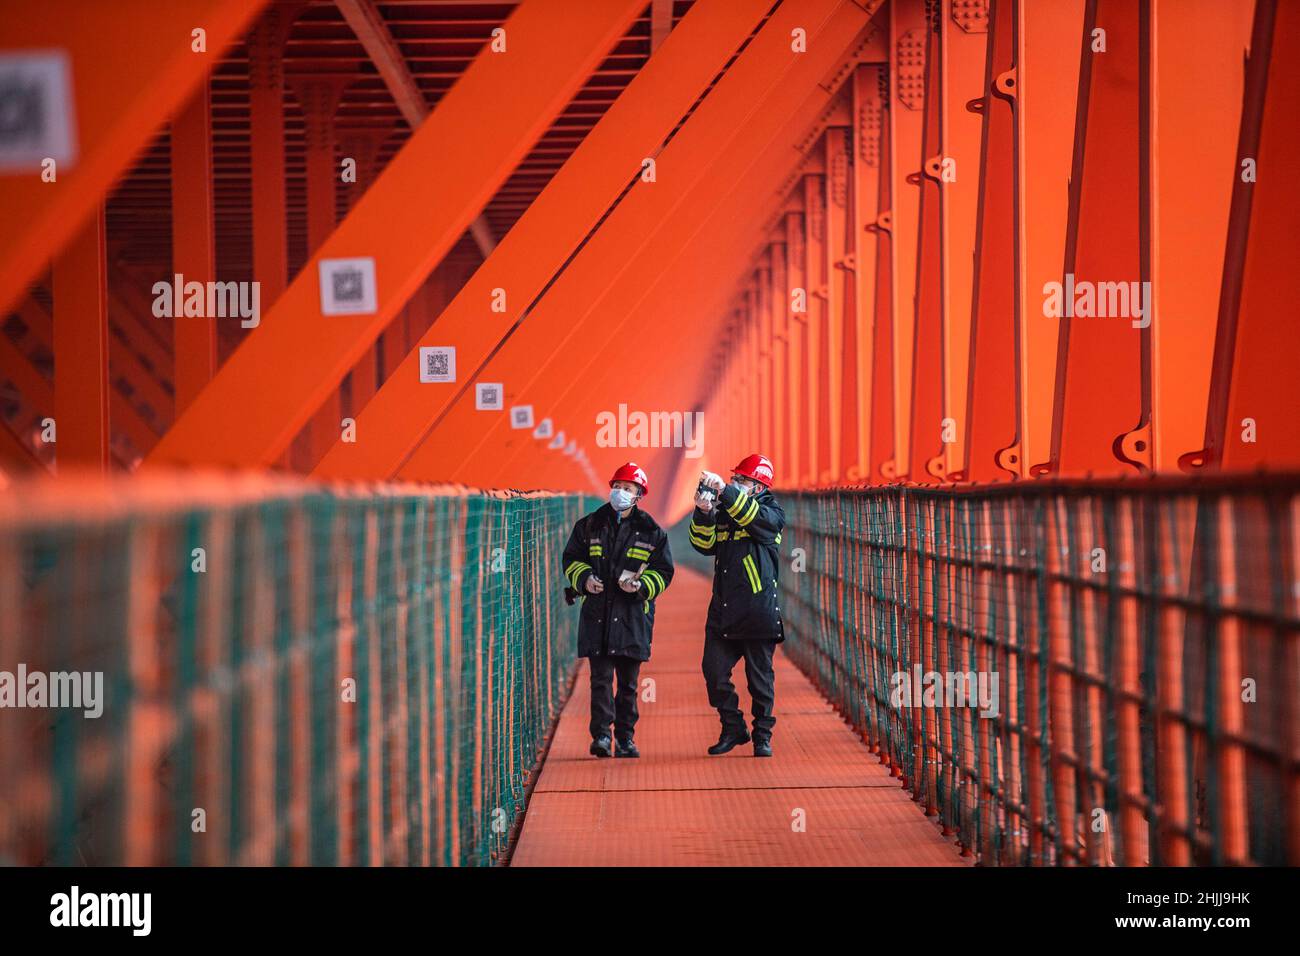 Liupanshui. 29th Jan, 2022. Maintenance workers examine the interior of the Beipanjiang Bridge in southwest China's Guizhou Province, Jan. 29, 2022. Sitting over 565.4 meters above a valley, the Beipanjiang Bridge has been certified as the world's highest bridge by the Guinness World Records. Spanning 1,341.4 meters, the bridge links Duge Township of Liupanshui in southwest China's Guizhou with Puli Township of Xuanwei in southwest China's Yunnan Province. Credit: Tao Liang/Xinhua/Alamy Live News Stock Photo